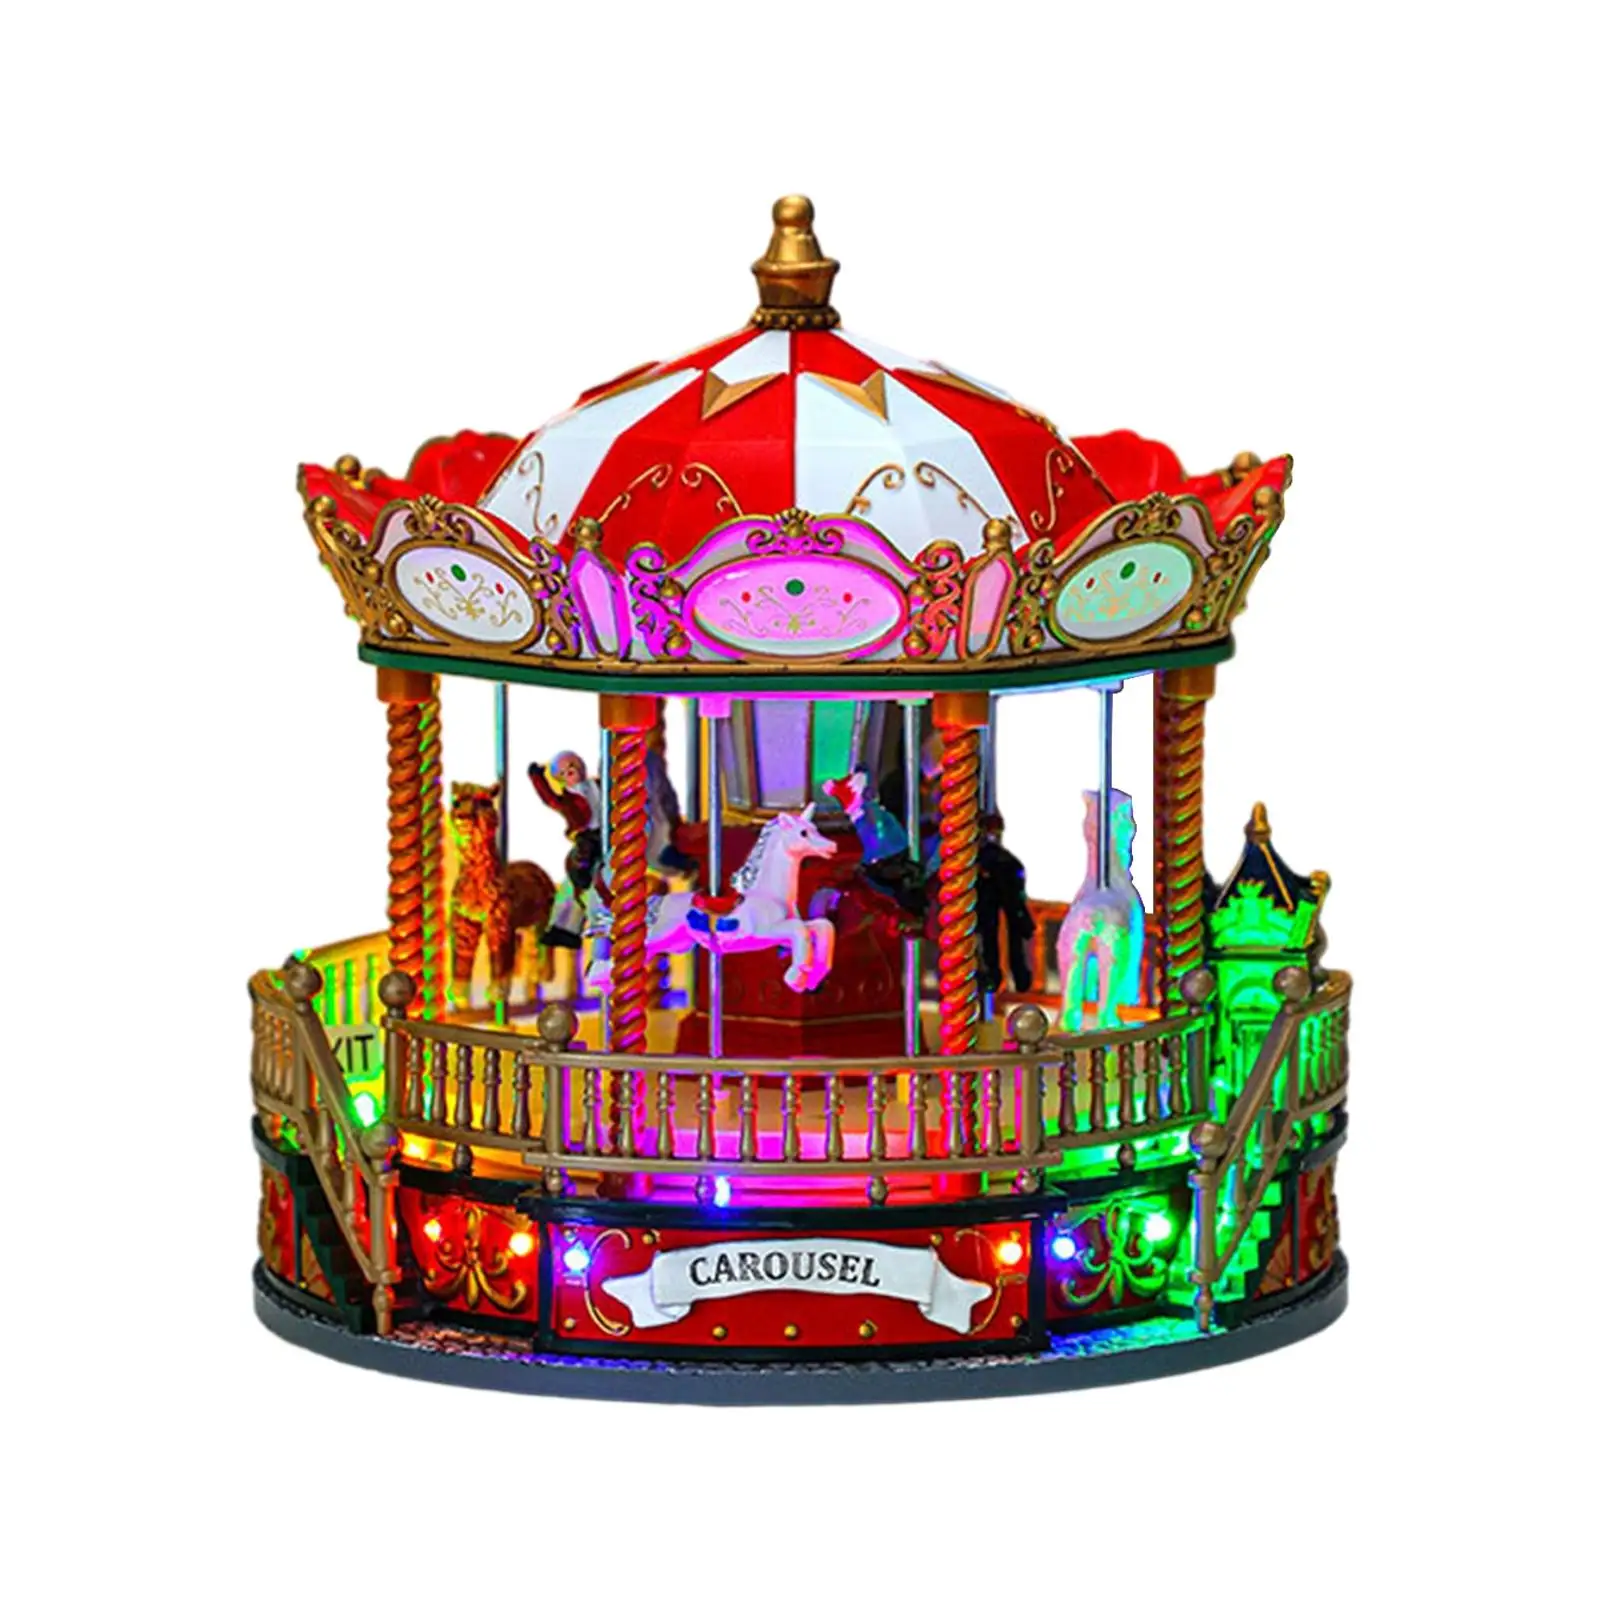 Christmas Carousel Music Box Musical Box with Music and Light Christmas Ornament for Festival Office Xmas Desk Decoration